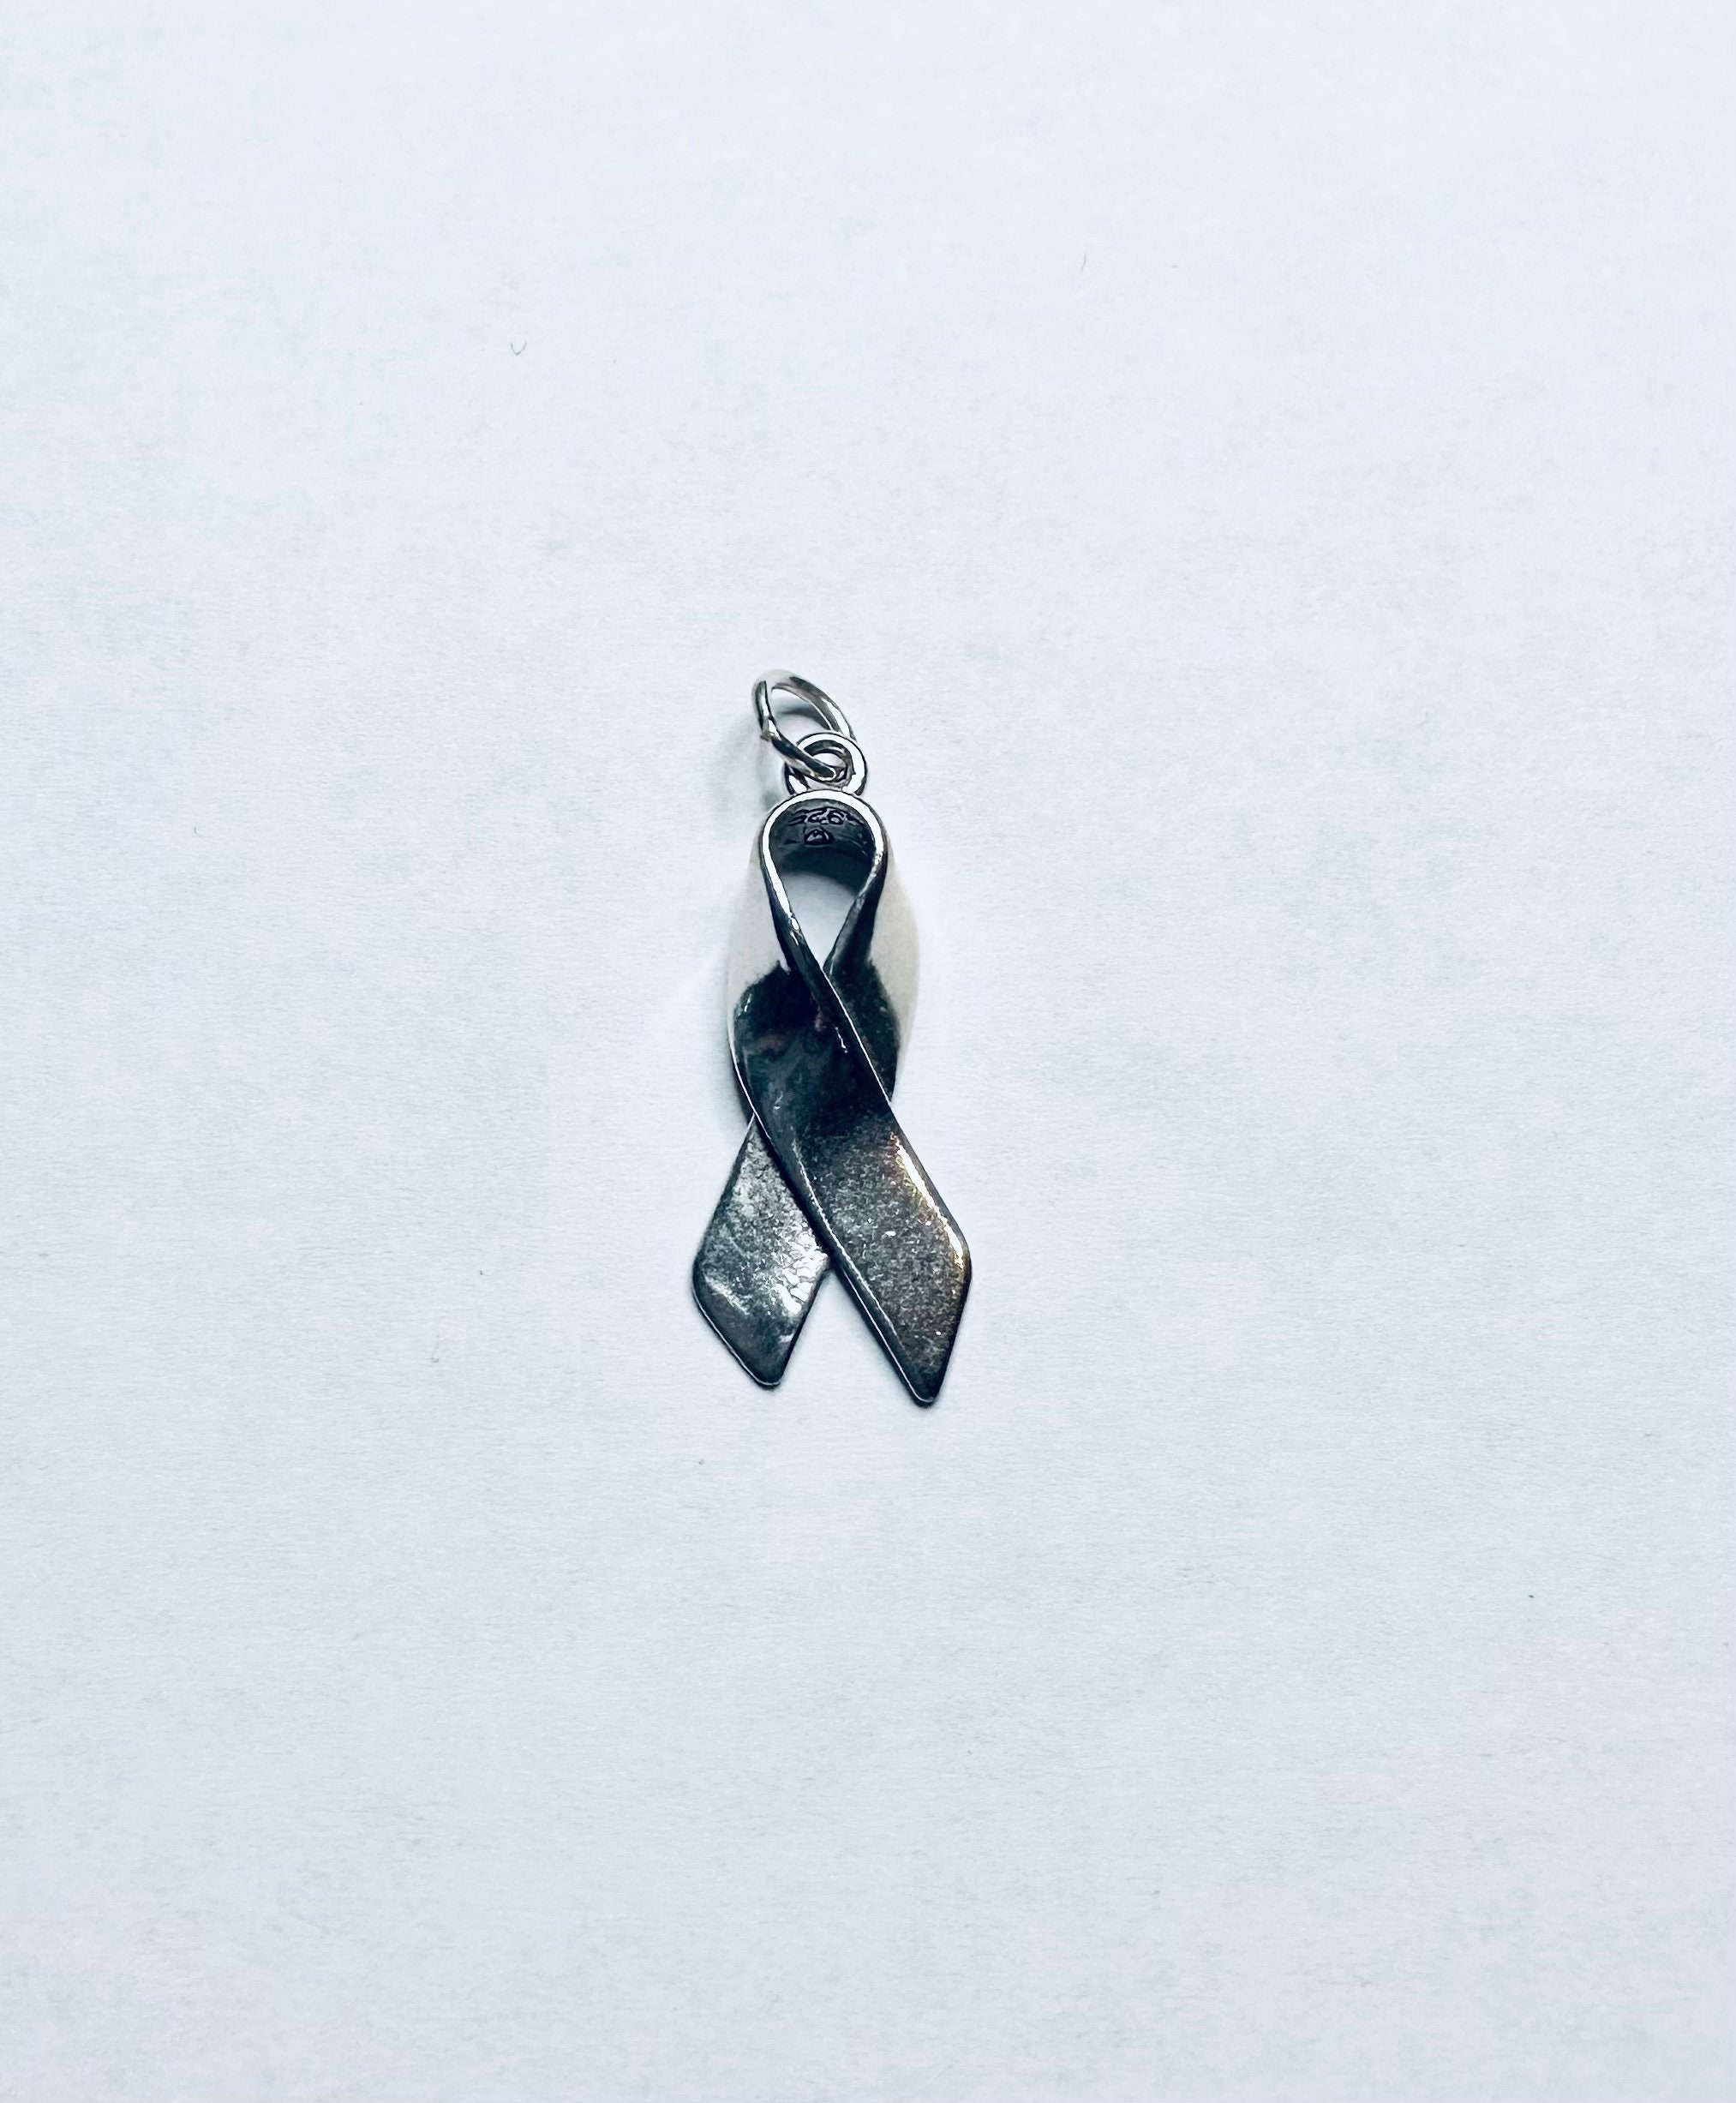 Awareness Ribbon Charm, Gold Filled, Sterling Silver, Permanent Jewelry  Charms, Bulk Gold Charms, Bulk Charms Silver, CH05 